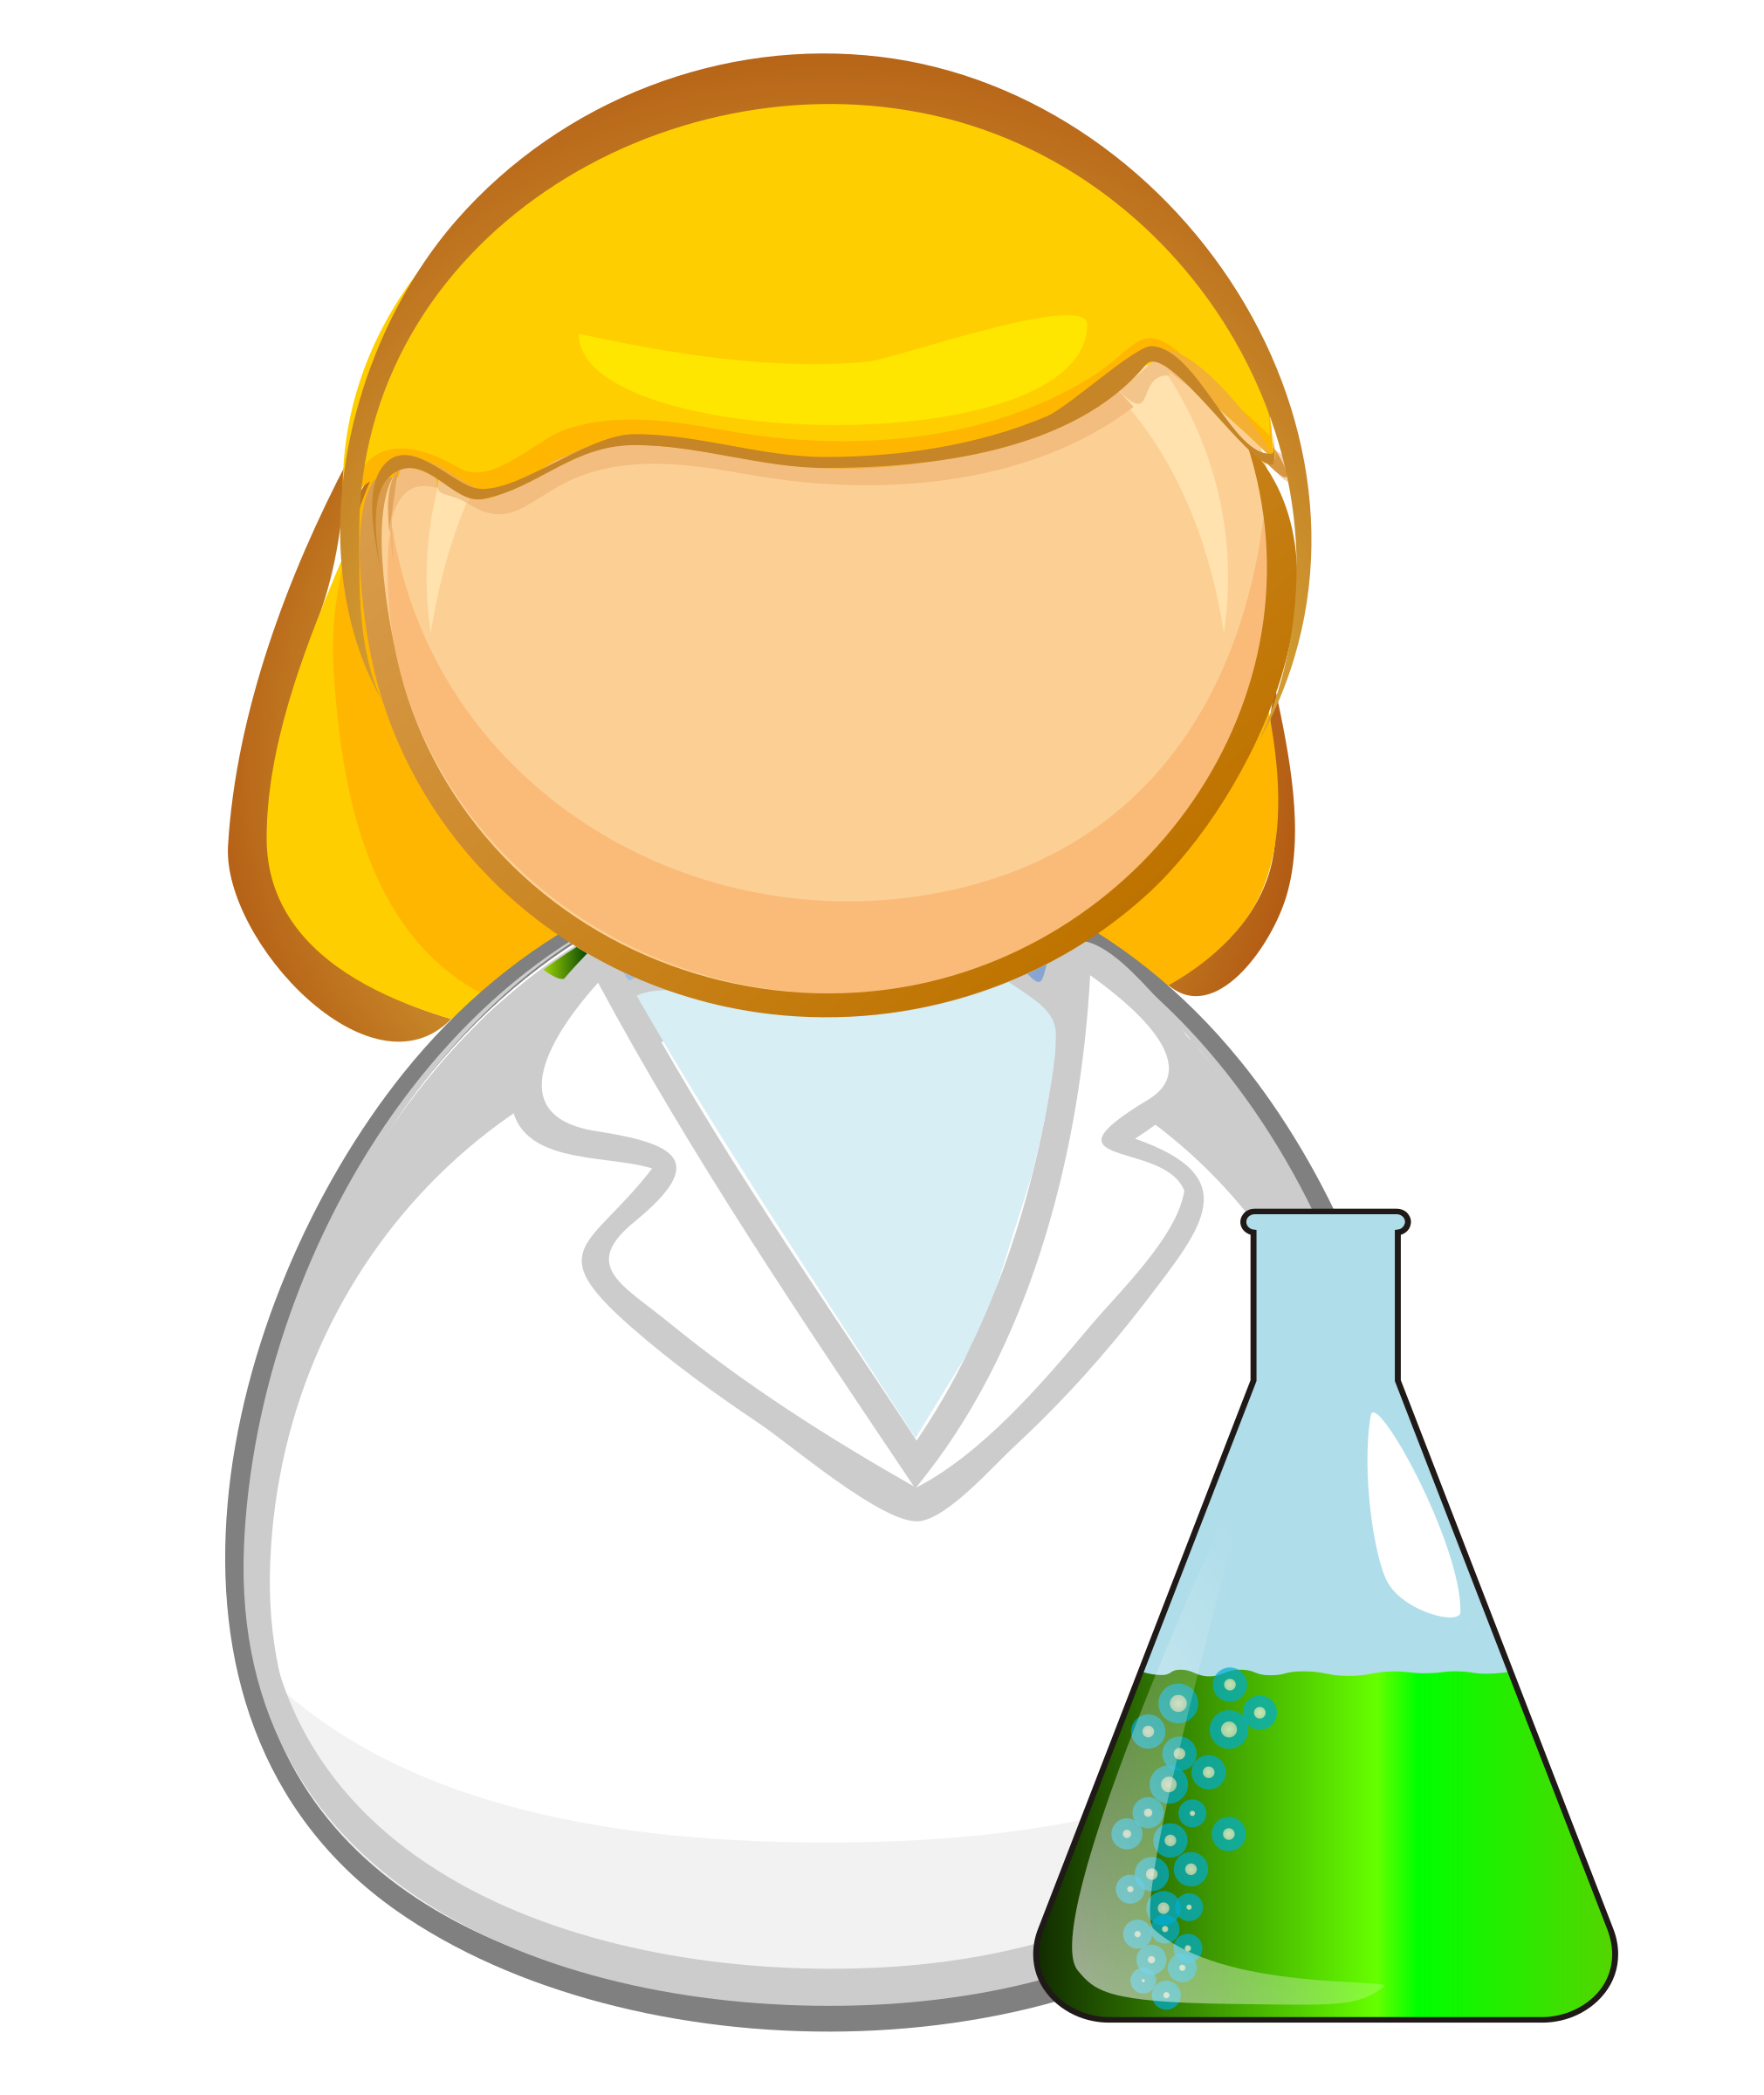 microscope clipart lab worker